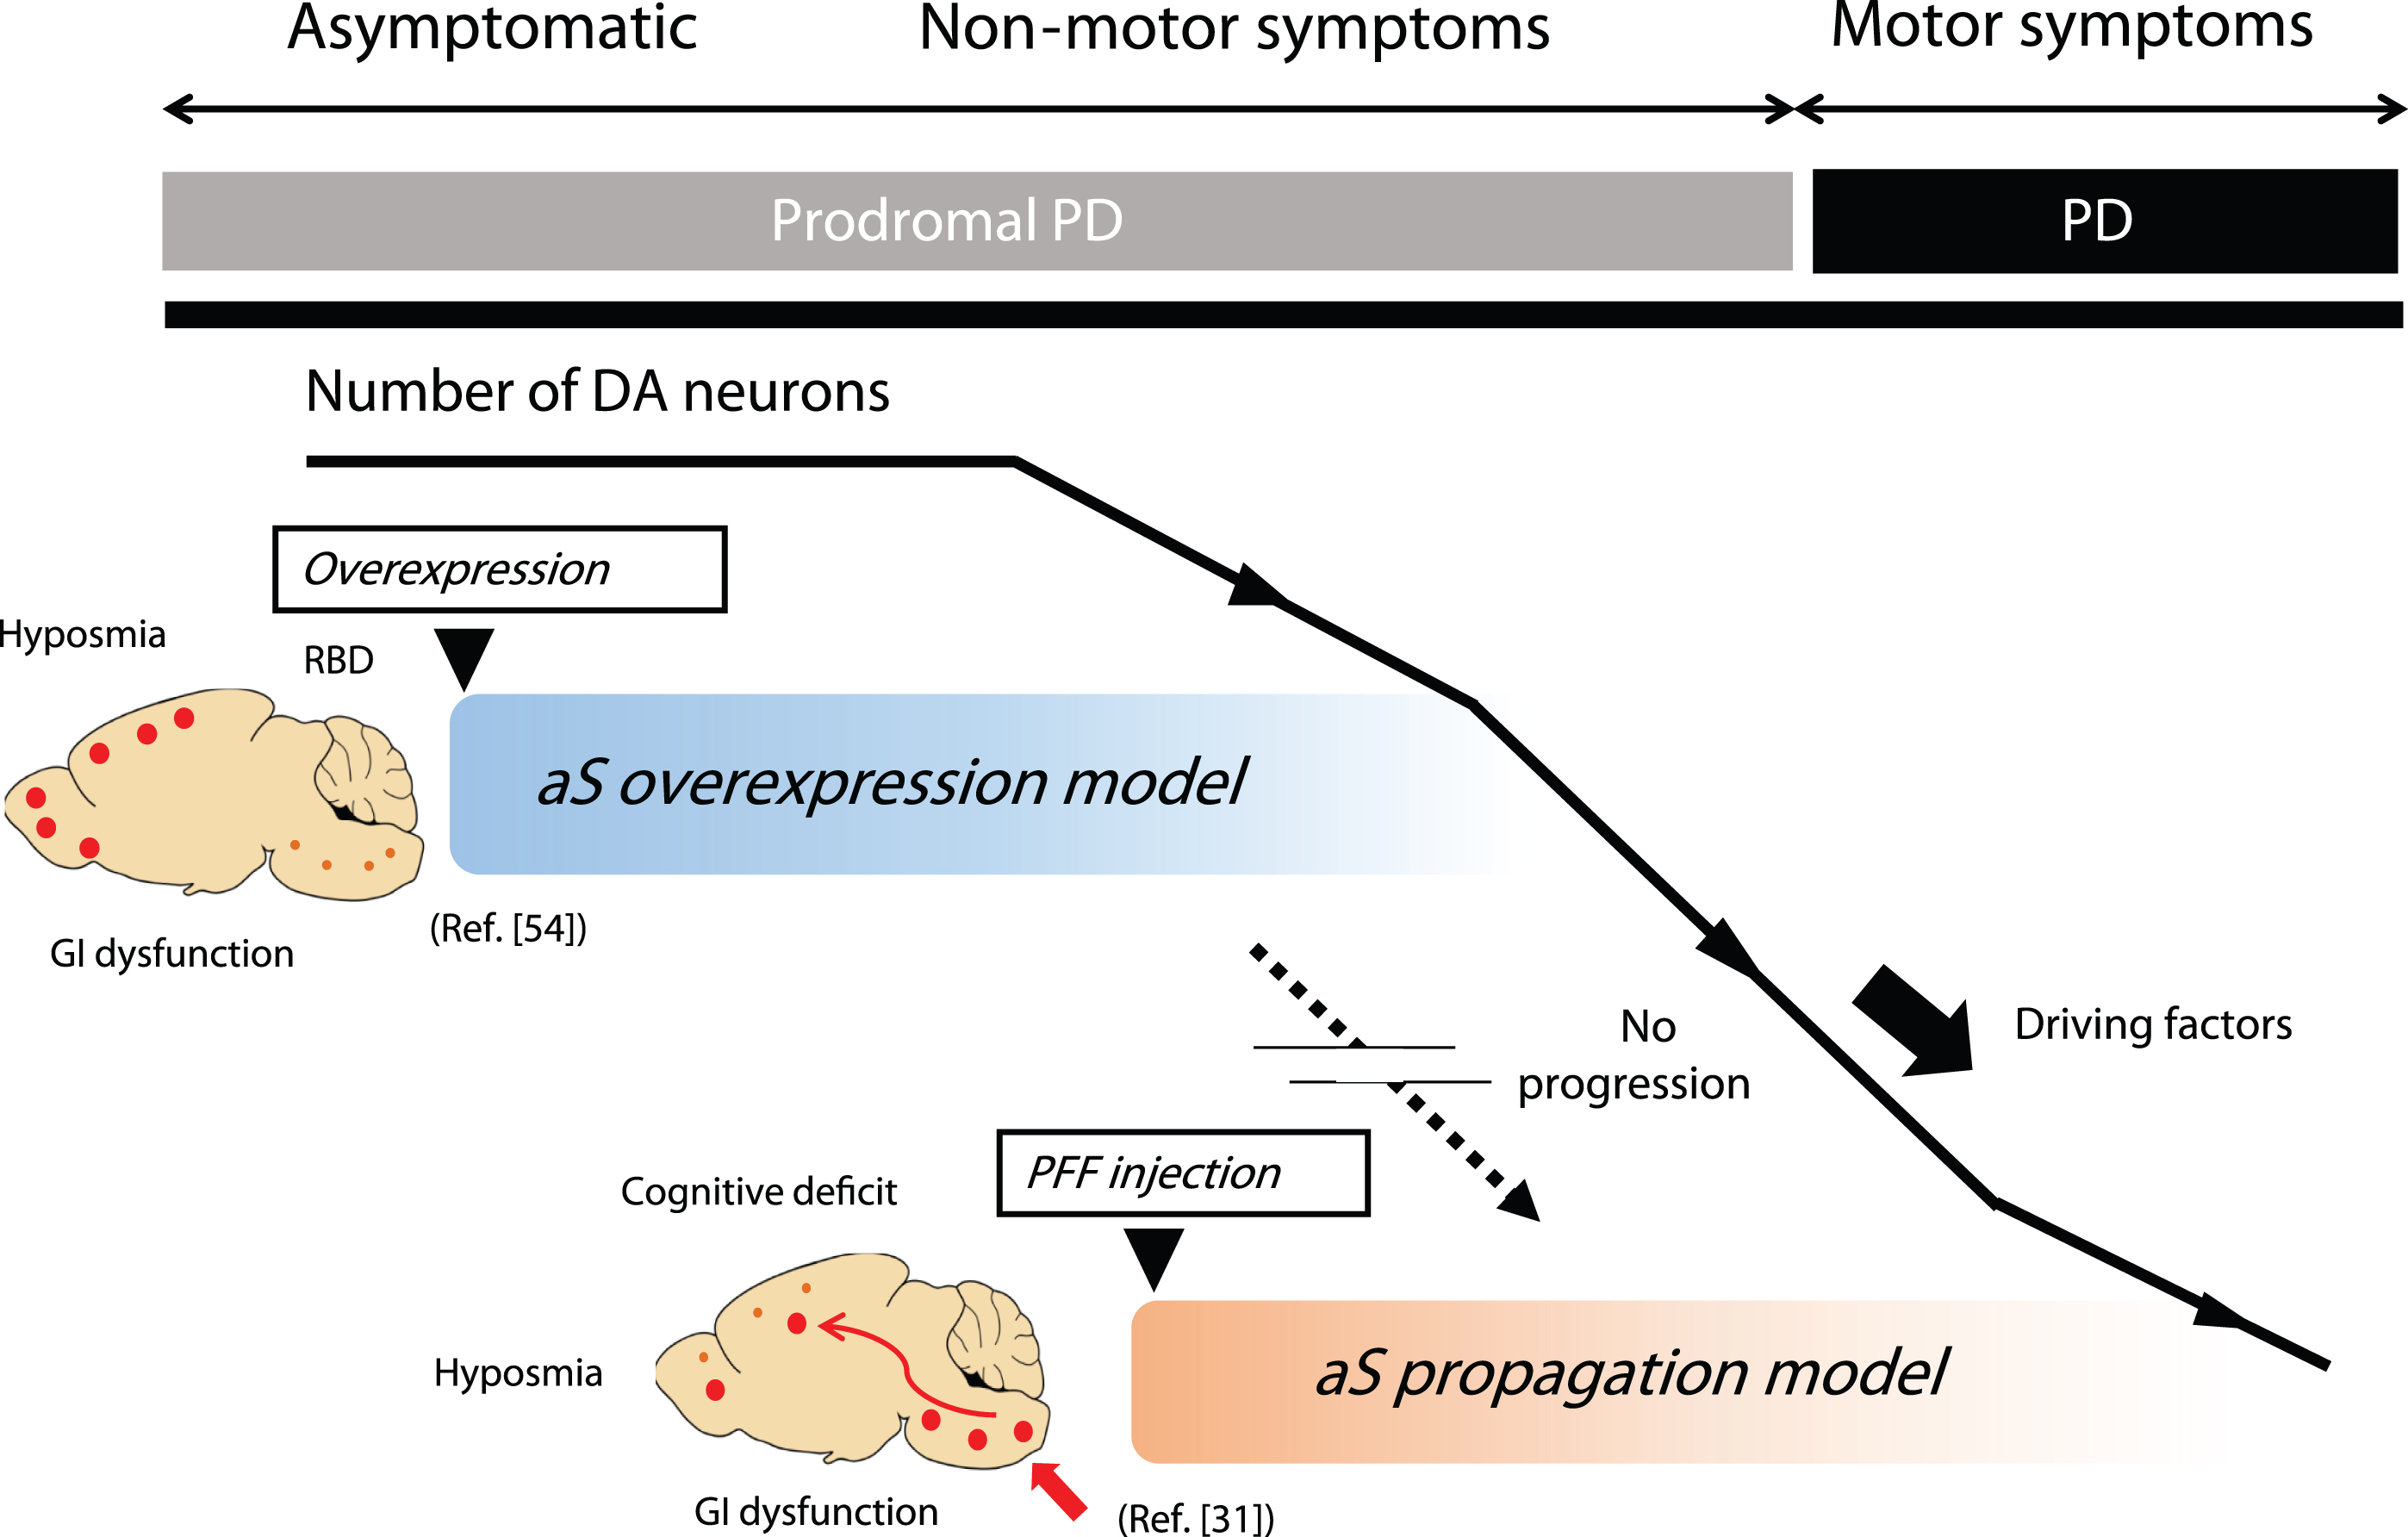 Representative animal models of prodromal PD. The genetic model represented by the aS overexpression model focuses on disease onset but fails to show motor symptoms associated with DA cell loss. While most successful aS propagation models exhibit robust propagation and DA cell loss, they often skip the critical initial step of aS aggregate formation. Thus, the entire natural course of the disease, from the prodromal to the symptomatic phase, is not fully replicated by a single animal model. This limitation is one of the drawbacks as a preclinical model for DMT, targeting the inhibition of progression from the prodromal to symptomatic phase of PD. aS, alpha-synuclein; DA, dopamine; GI, gastrointestinal; PD, Parkinson’s disease; PFF, preformed fibrils; RBD, REM sleep behavior disorder.